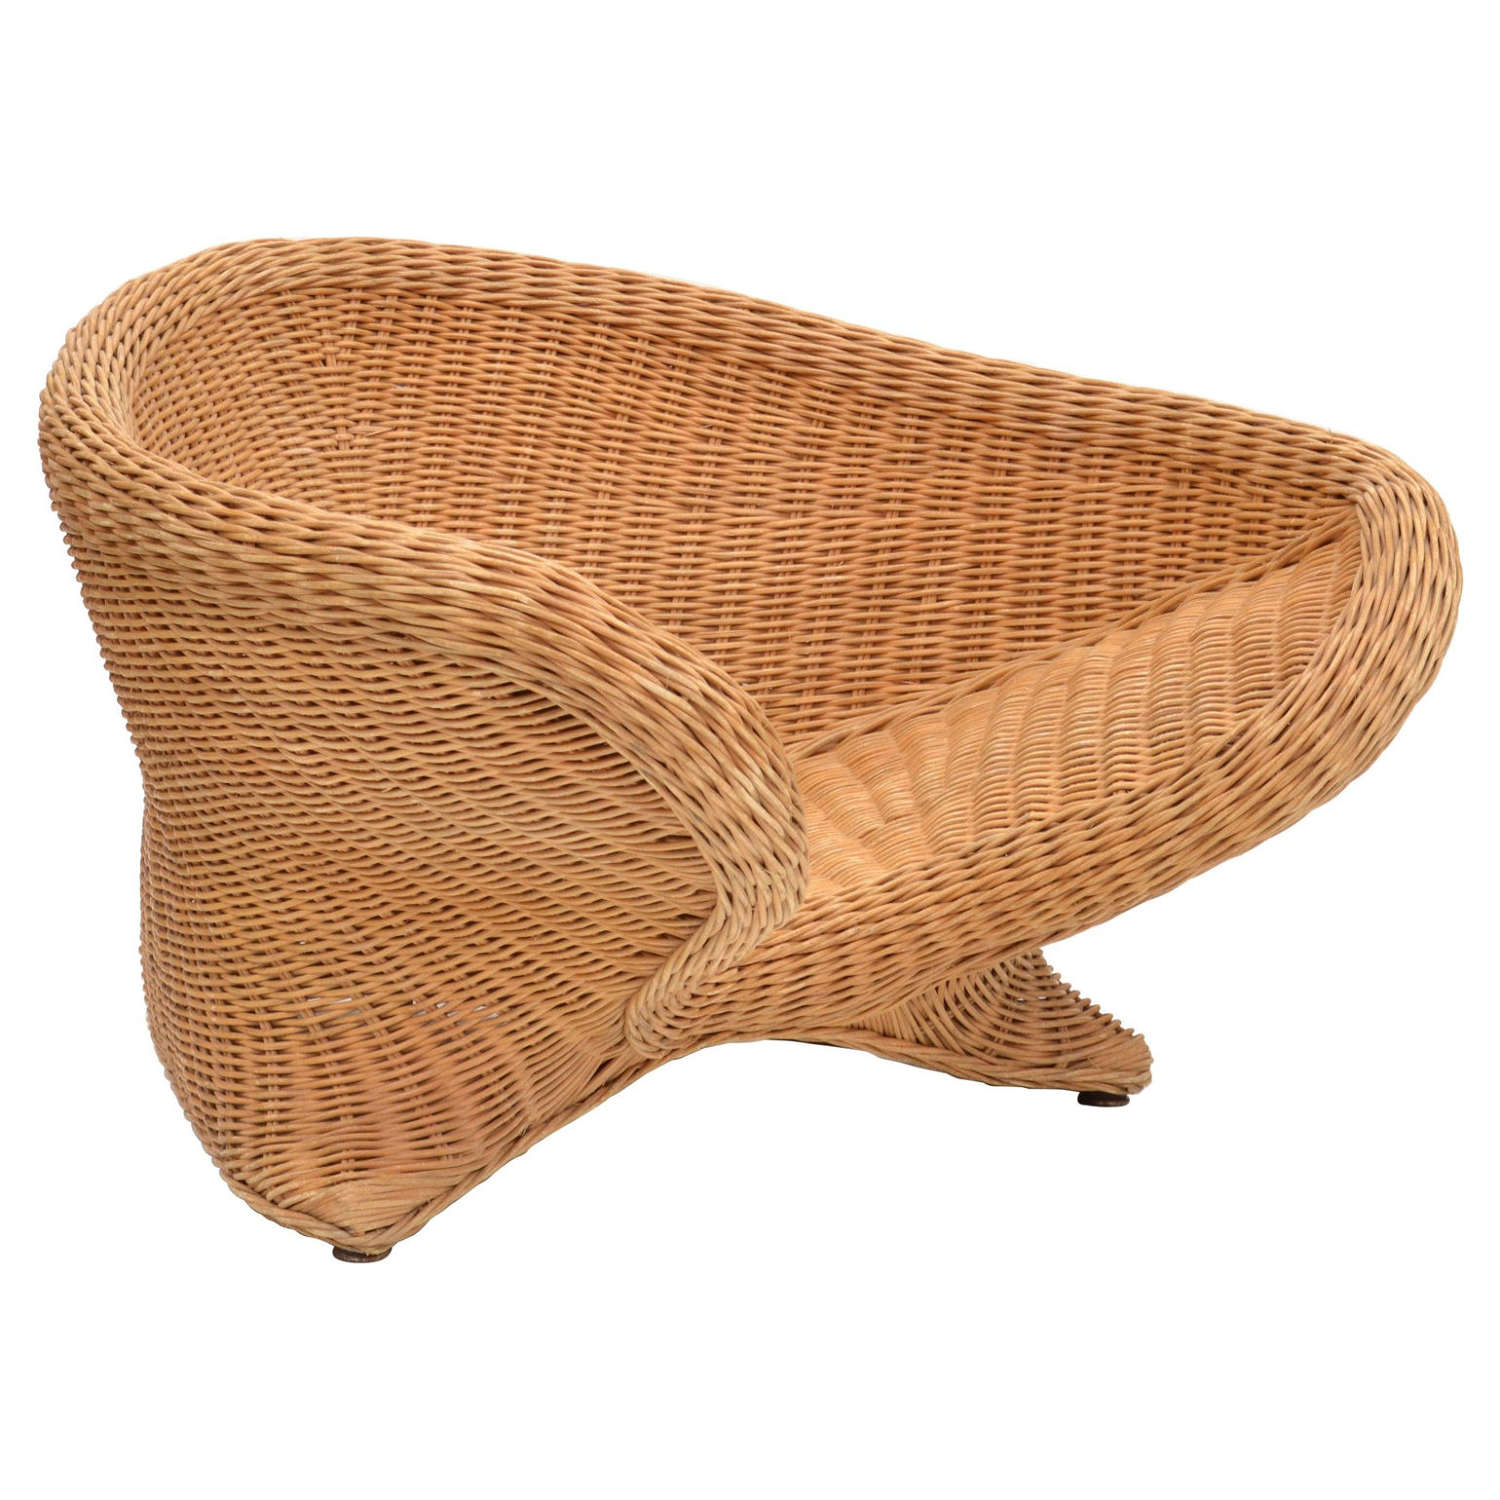 Curvaceous Cane Chair for Indoor or Garden